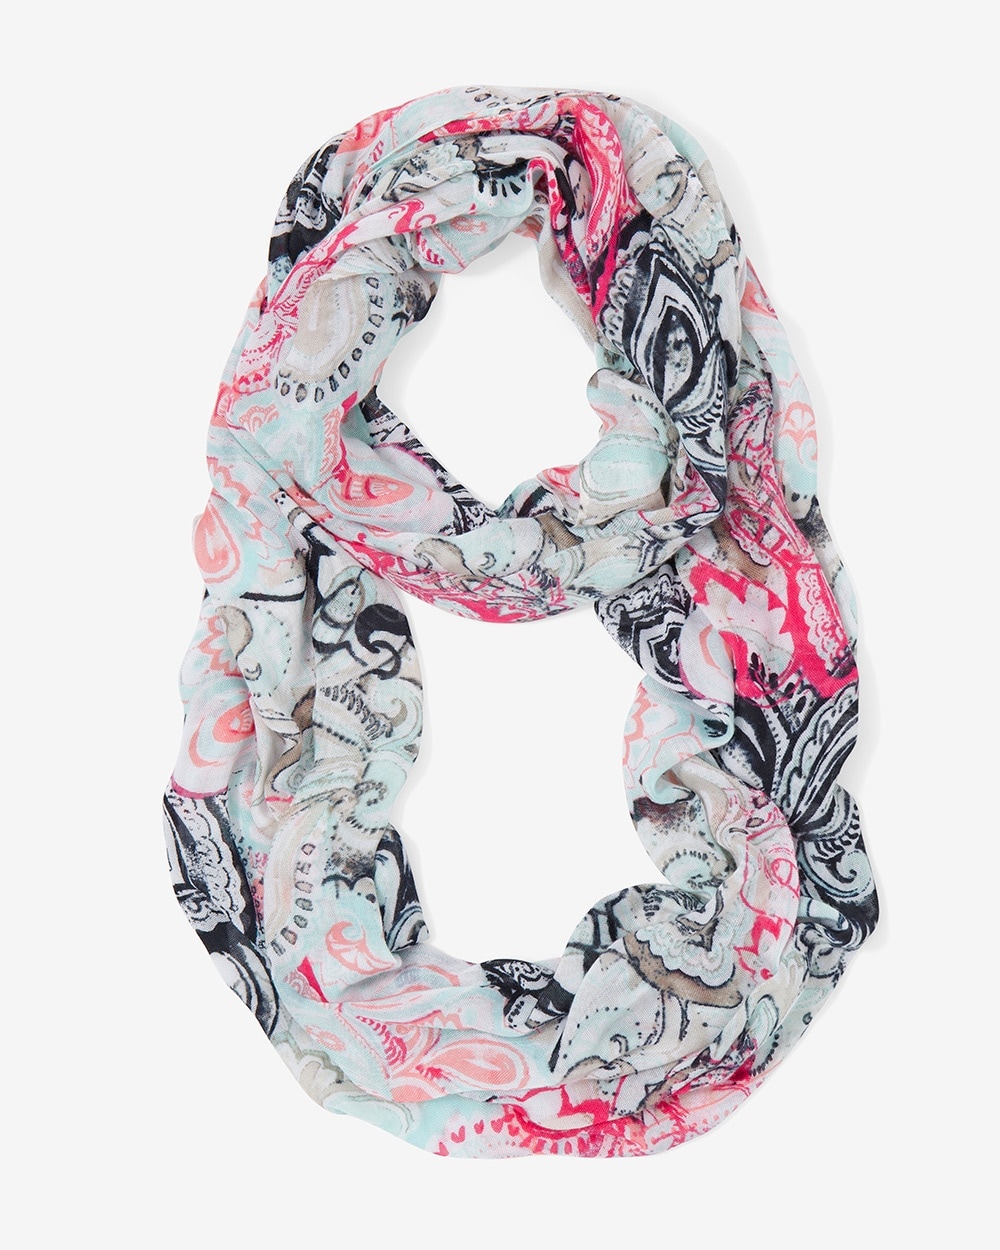 Prismatic Paisley Infinity Scarf